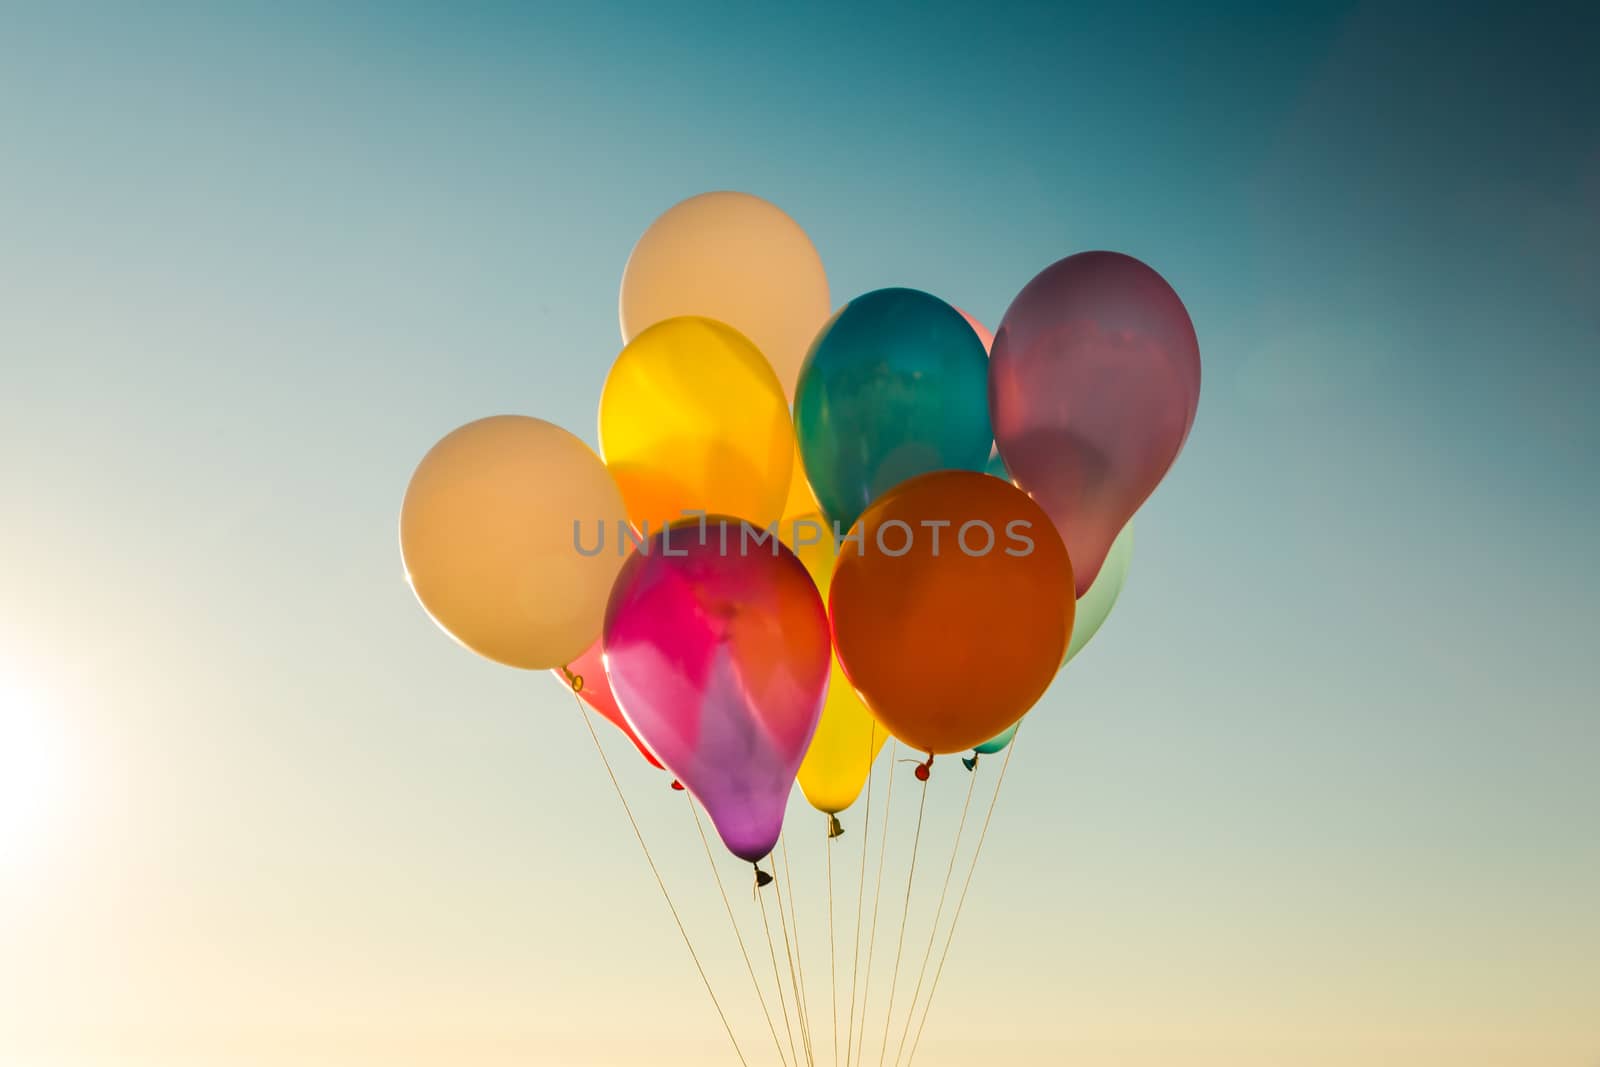 Balloons flywing by Iko